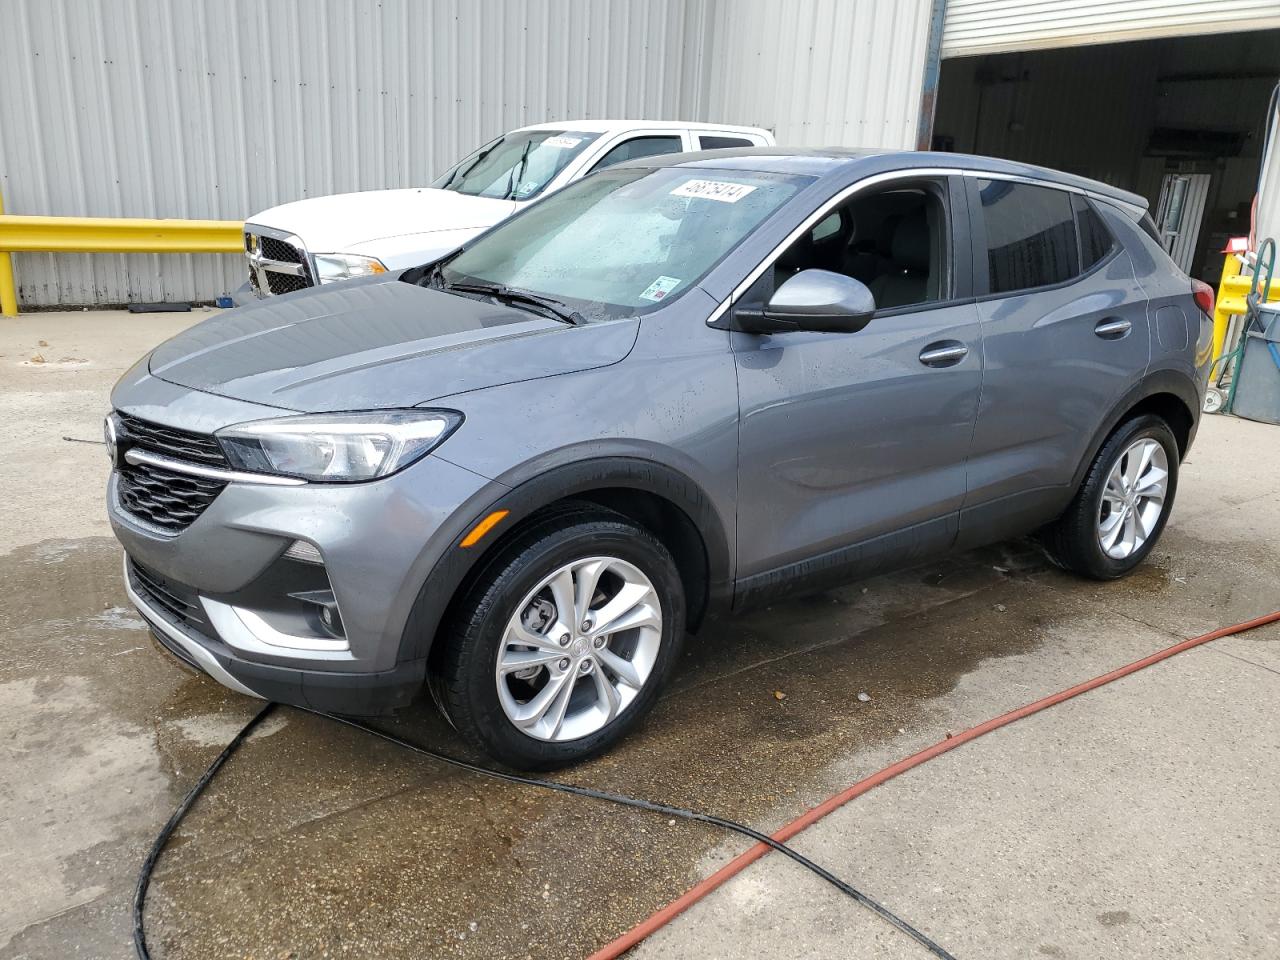 vin: KL4MMBS20LB102174 KL4MMBS20LB102174 2020 buick encore 1200 for Sale in 70129 2348, La - New Orleans, New Orleans, USA